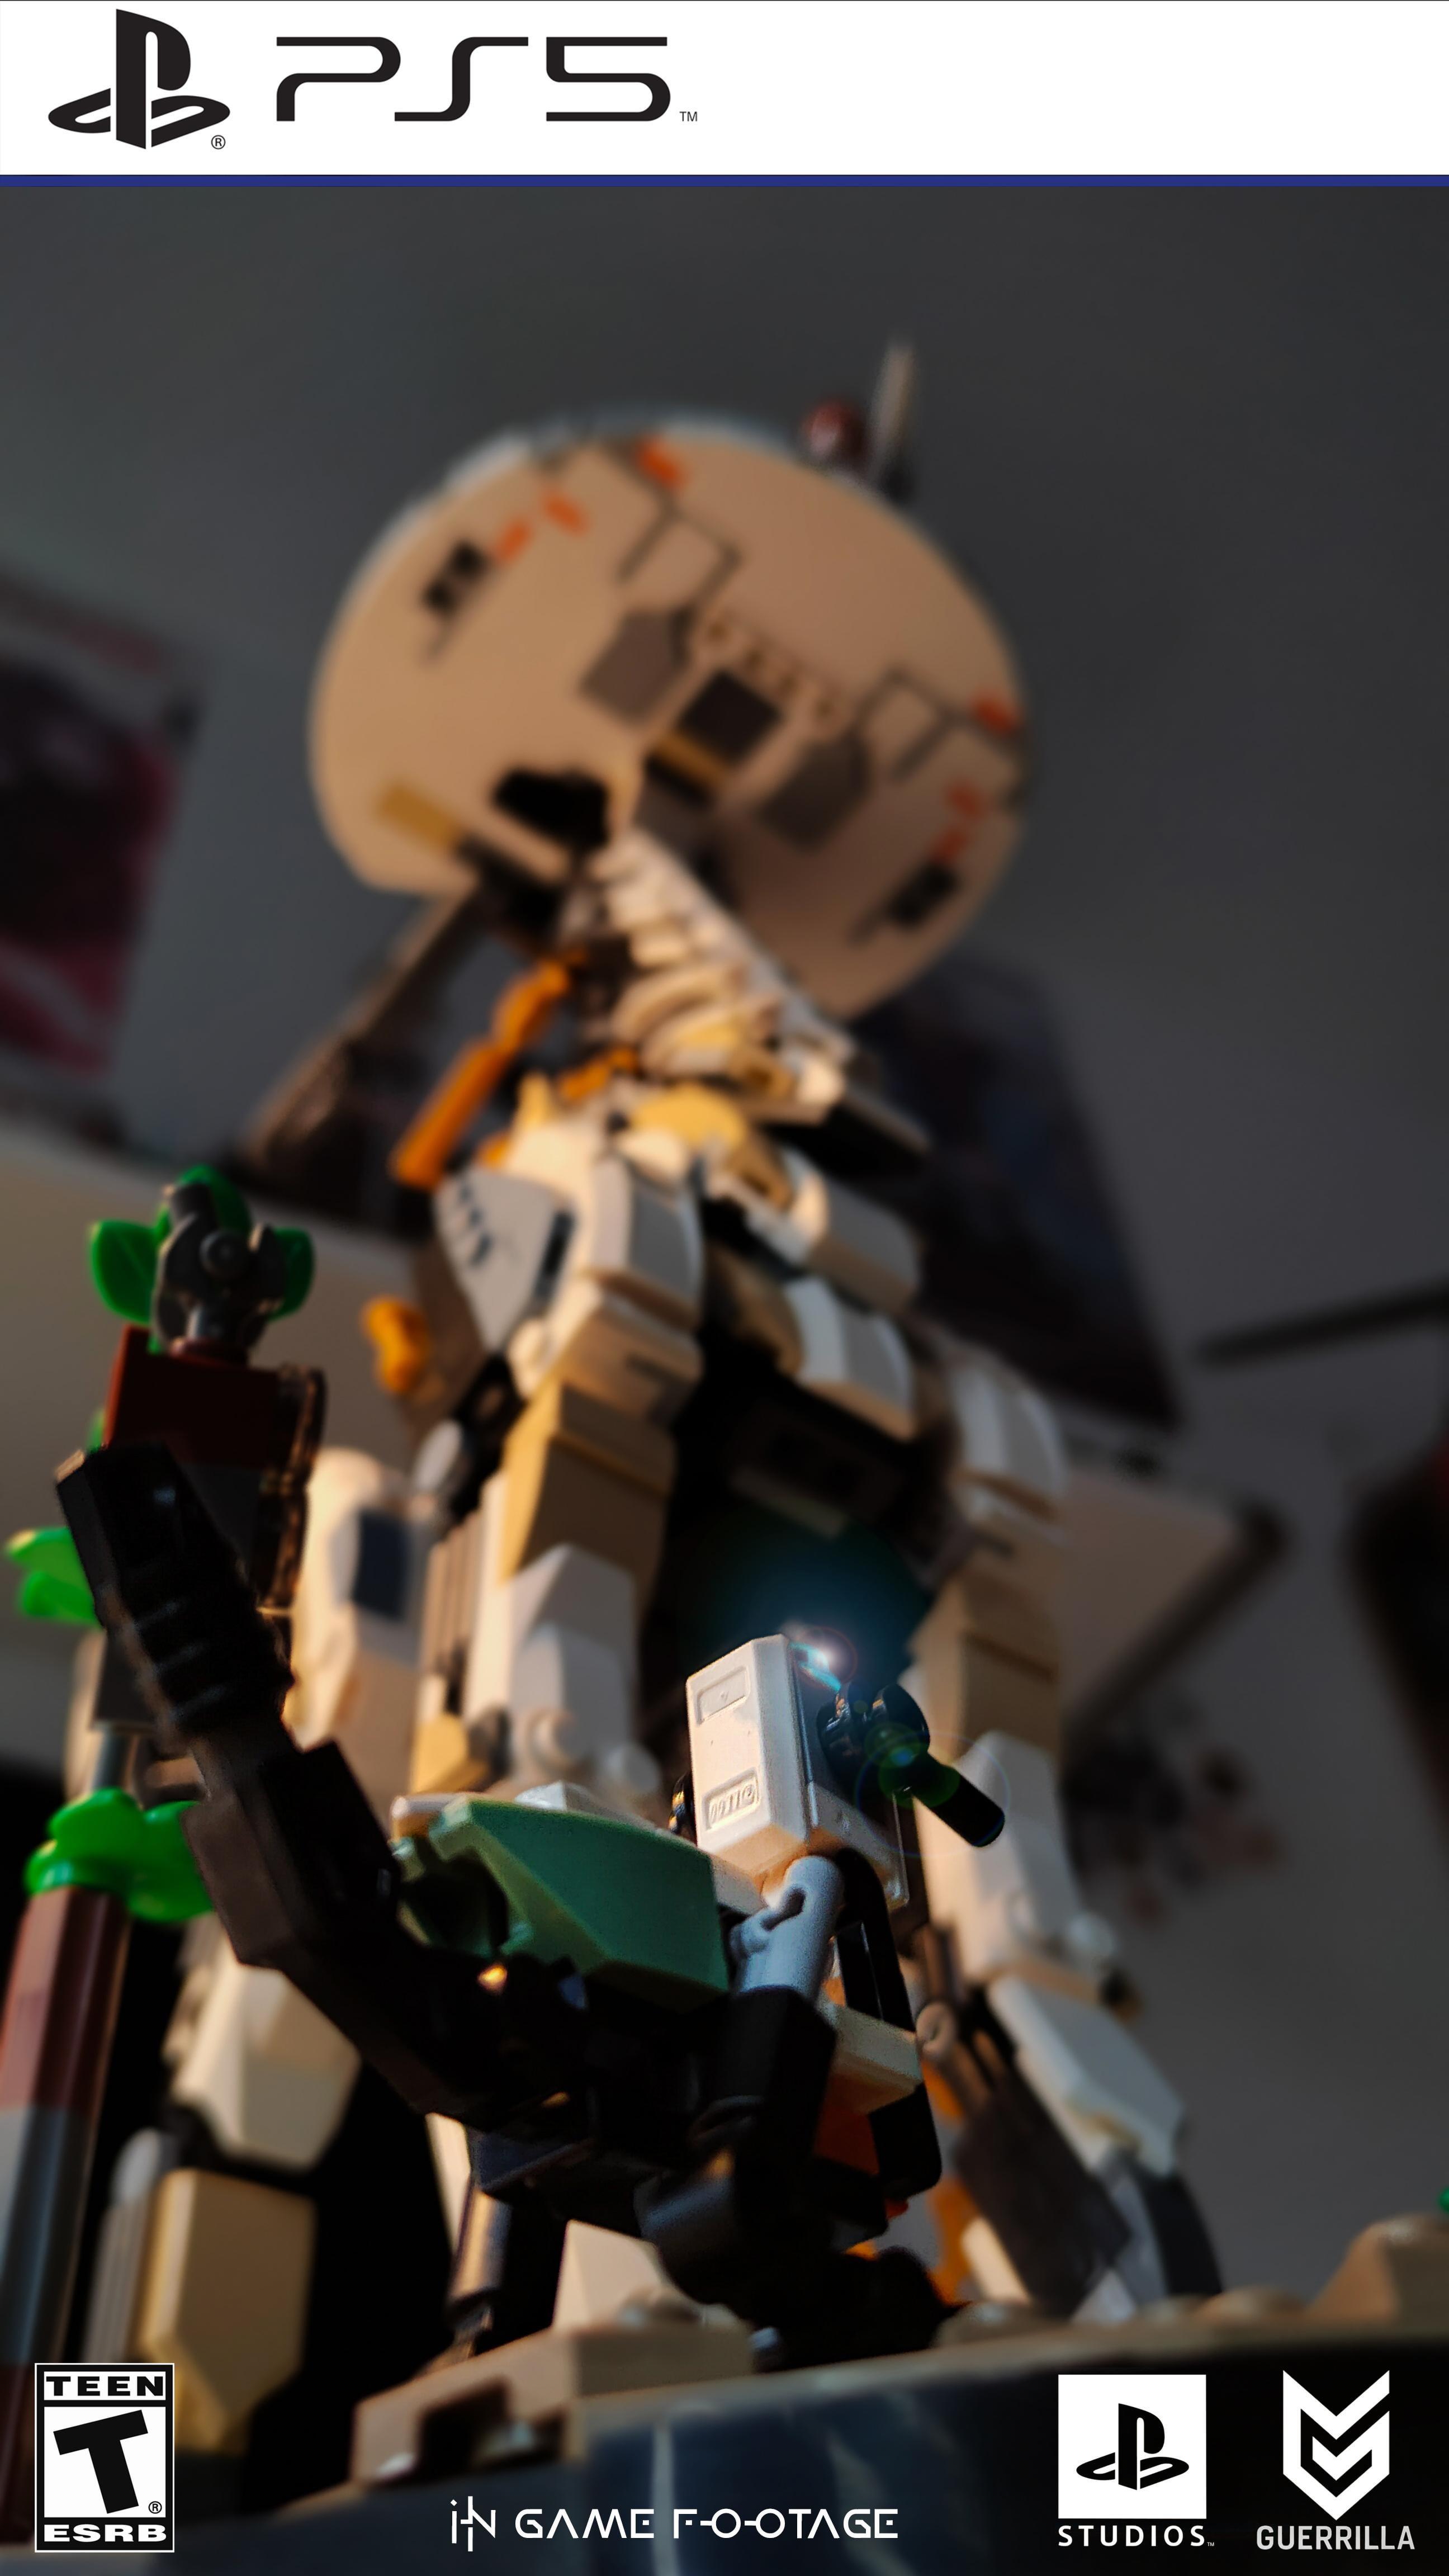 Tried To Make Some Cinematic Wallpaper With My Lego Tallneck R